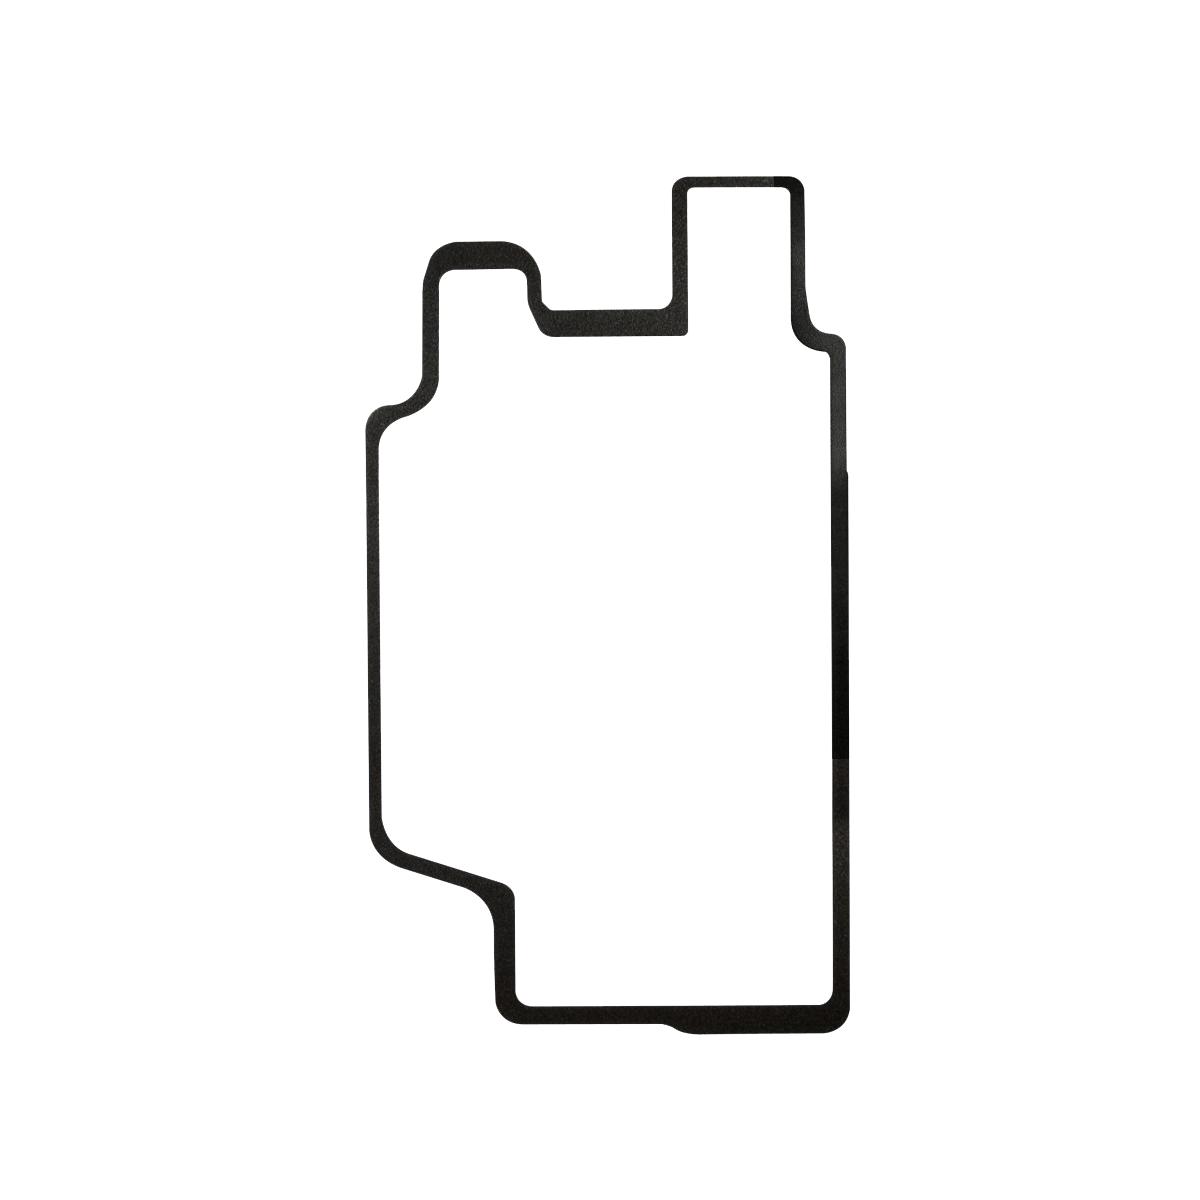 Samsung Galaxy S5 Back Battery Cover Waterproof Gasket Replacement